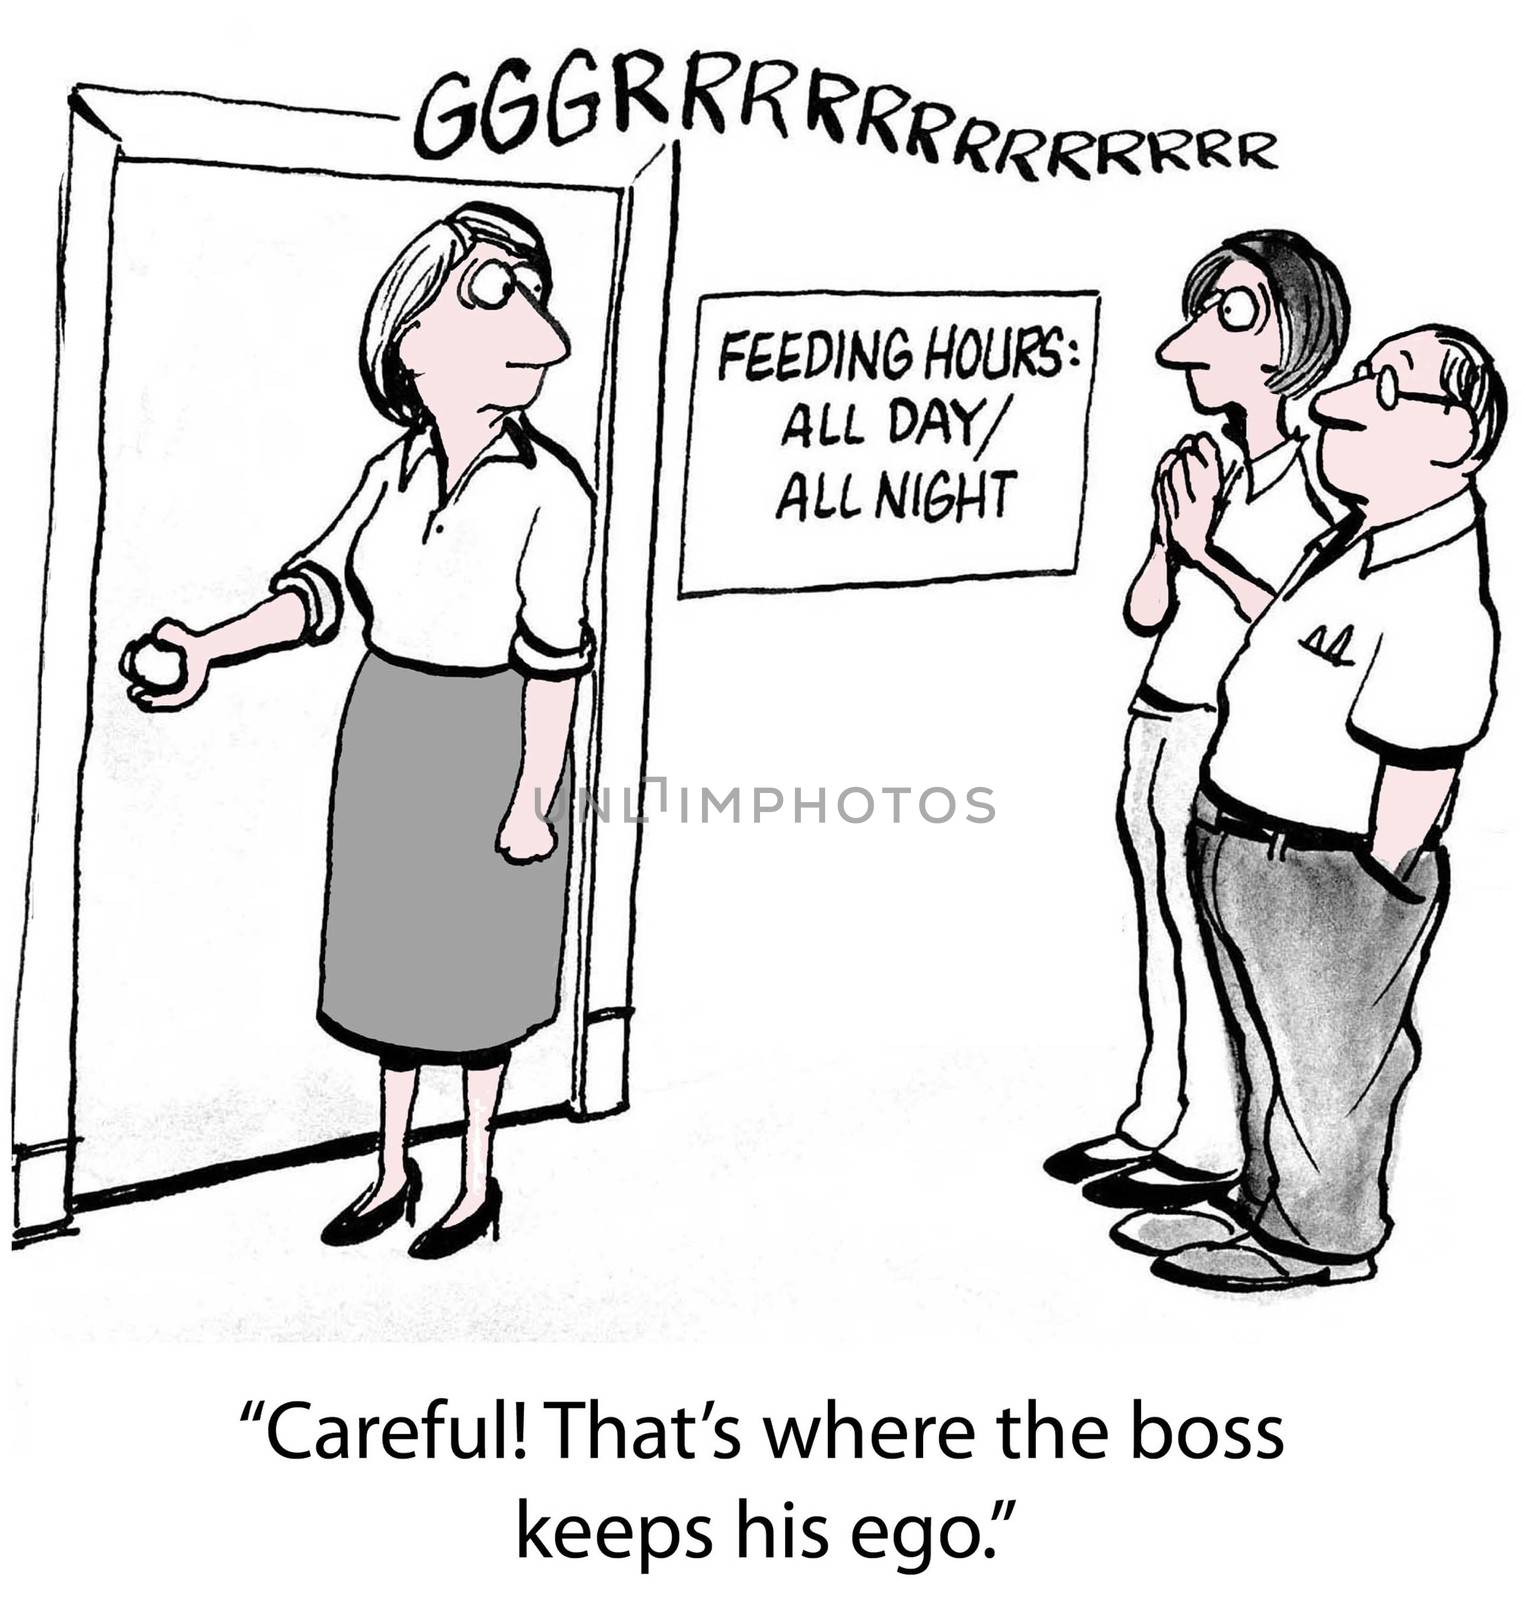 Worker opens door that leads to boss' ego by andrewgenn